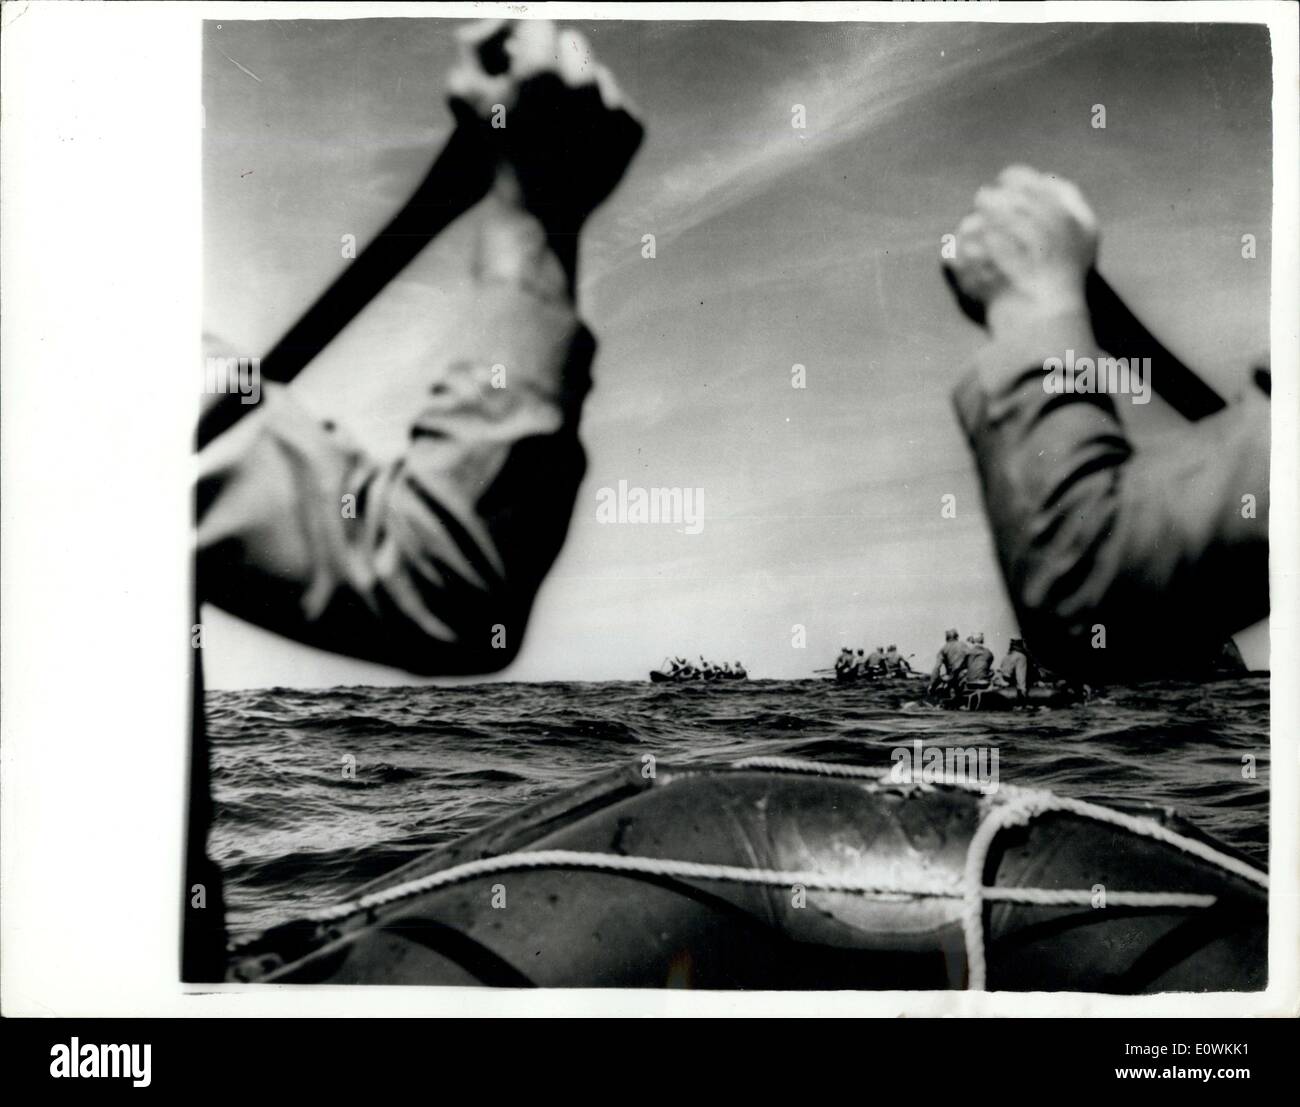 Apr. 26, 1963 - New technique for landing Reconaissance Parties.: The U.S. Submarine Segundo has been carrying out trials with marines off Okinawa. The idea being that the marines take their places in rubber rafts on the forward deck of the submarine which then submerges leaving the men to paddle quietly ashore. After completing the mission the troops return to the submarine which watches for them through the periscope. In the event of enemy fire preventing the submarine from surfacing, the troops could tie a rope to the periscope and be towed out to sea Stock Photo